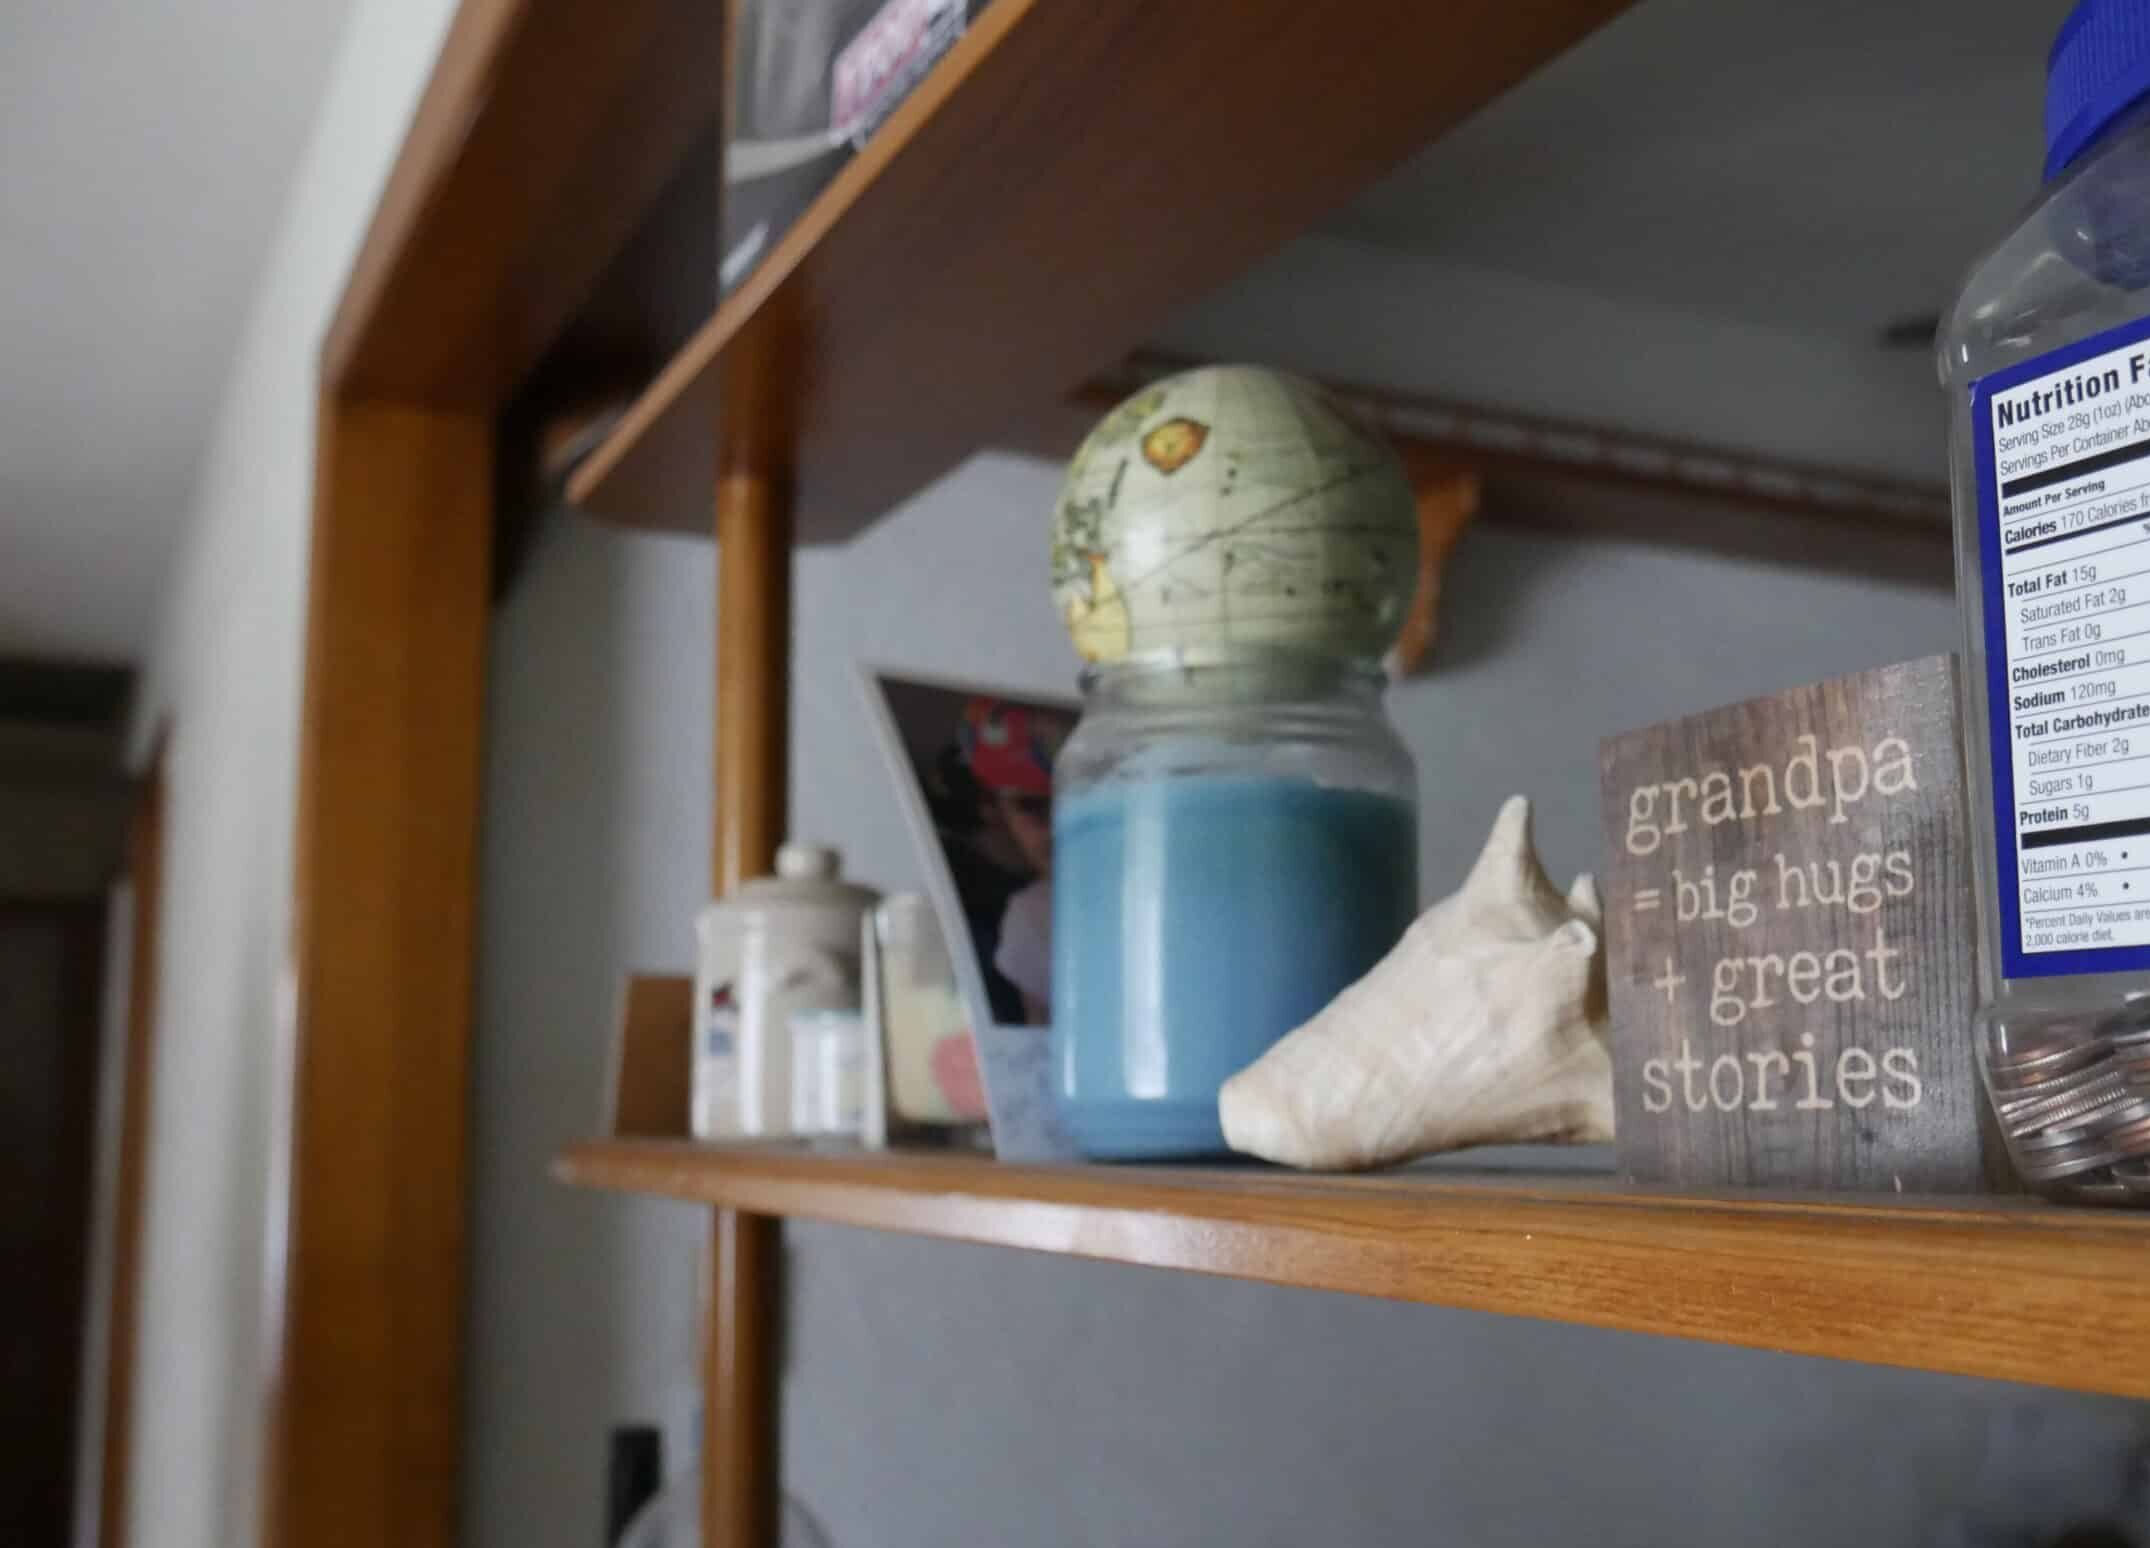 A collection of items on a shelf. One of the items is a globe, one is a seashell, and another is a sign that says "grandpa = big hugs and great stories"